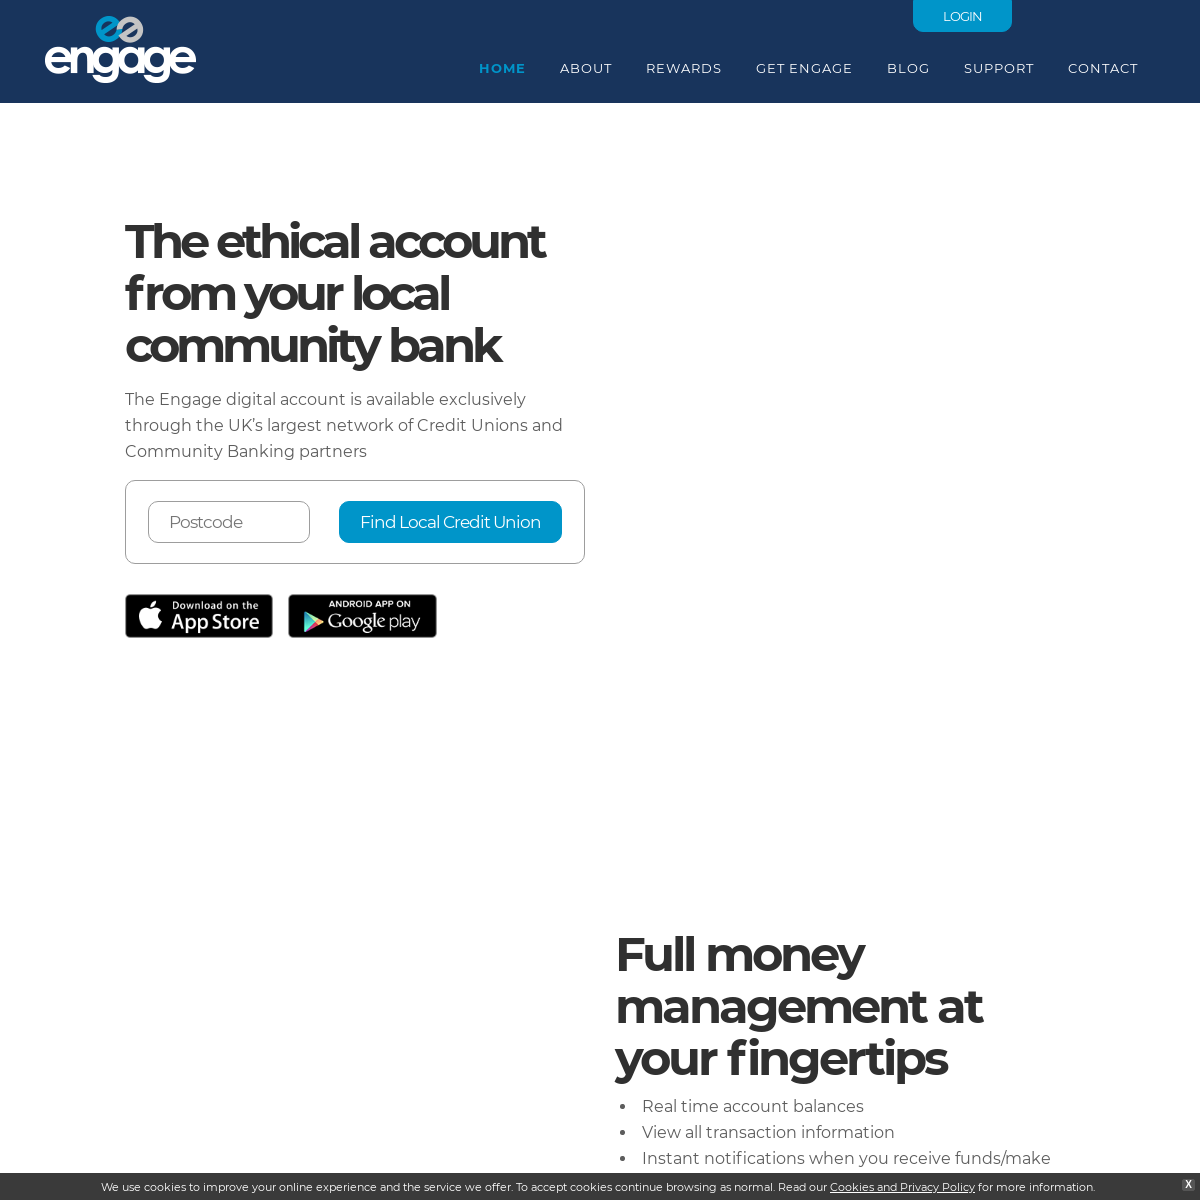 A complete backup of engageaccount.com